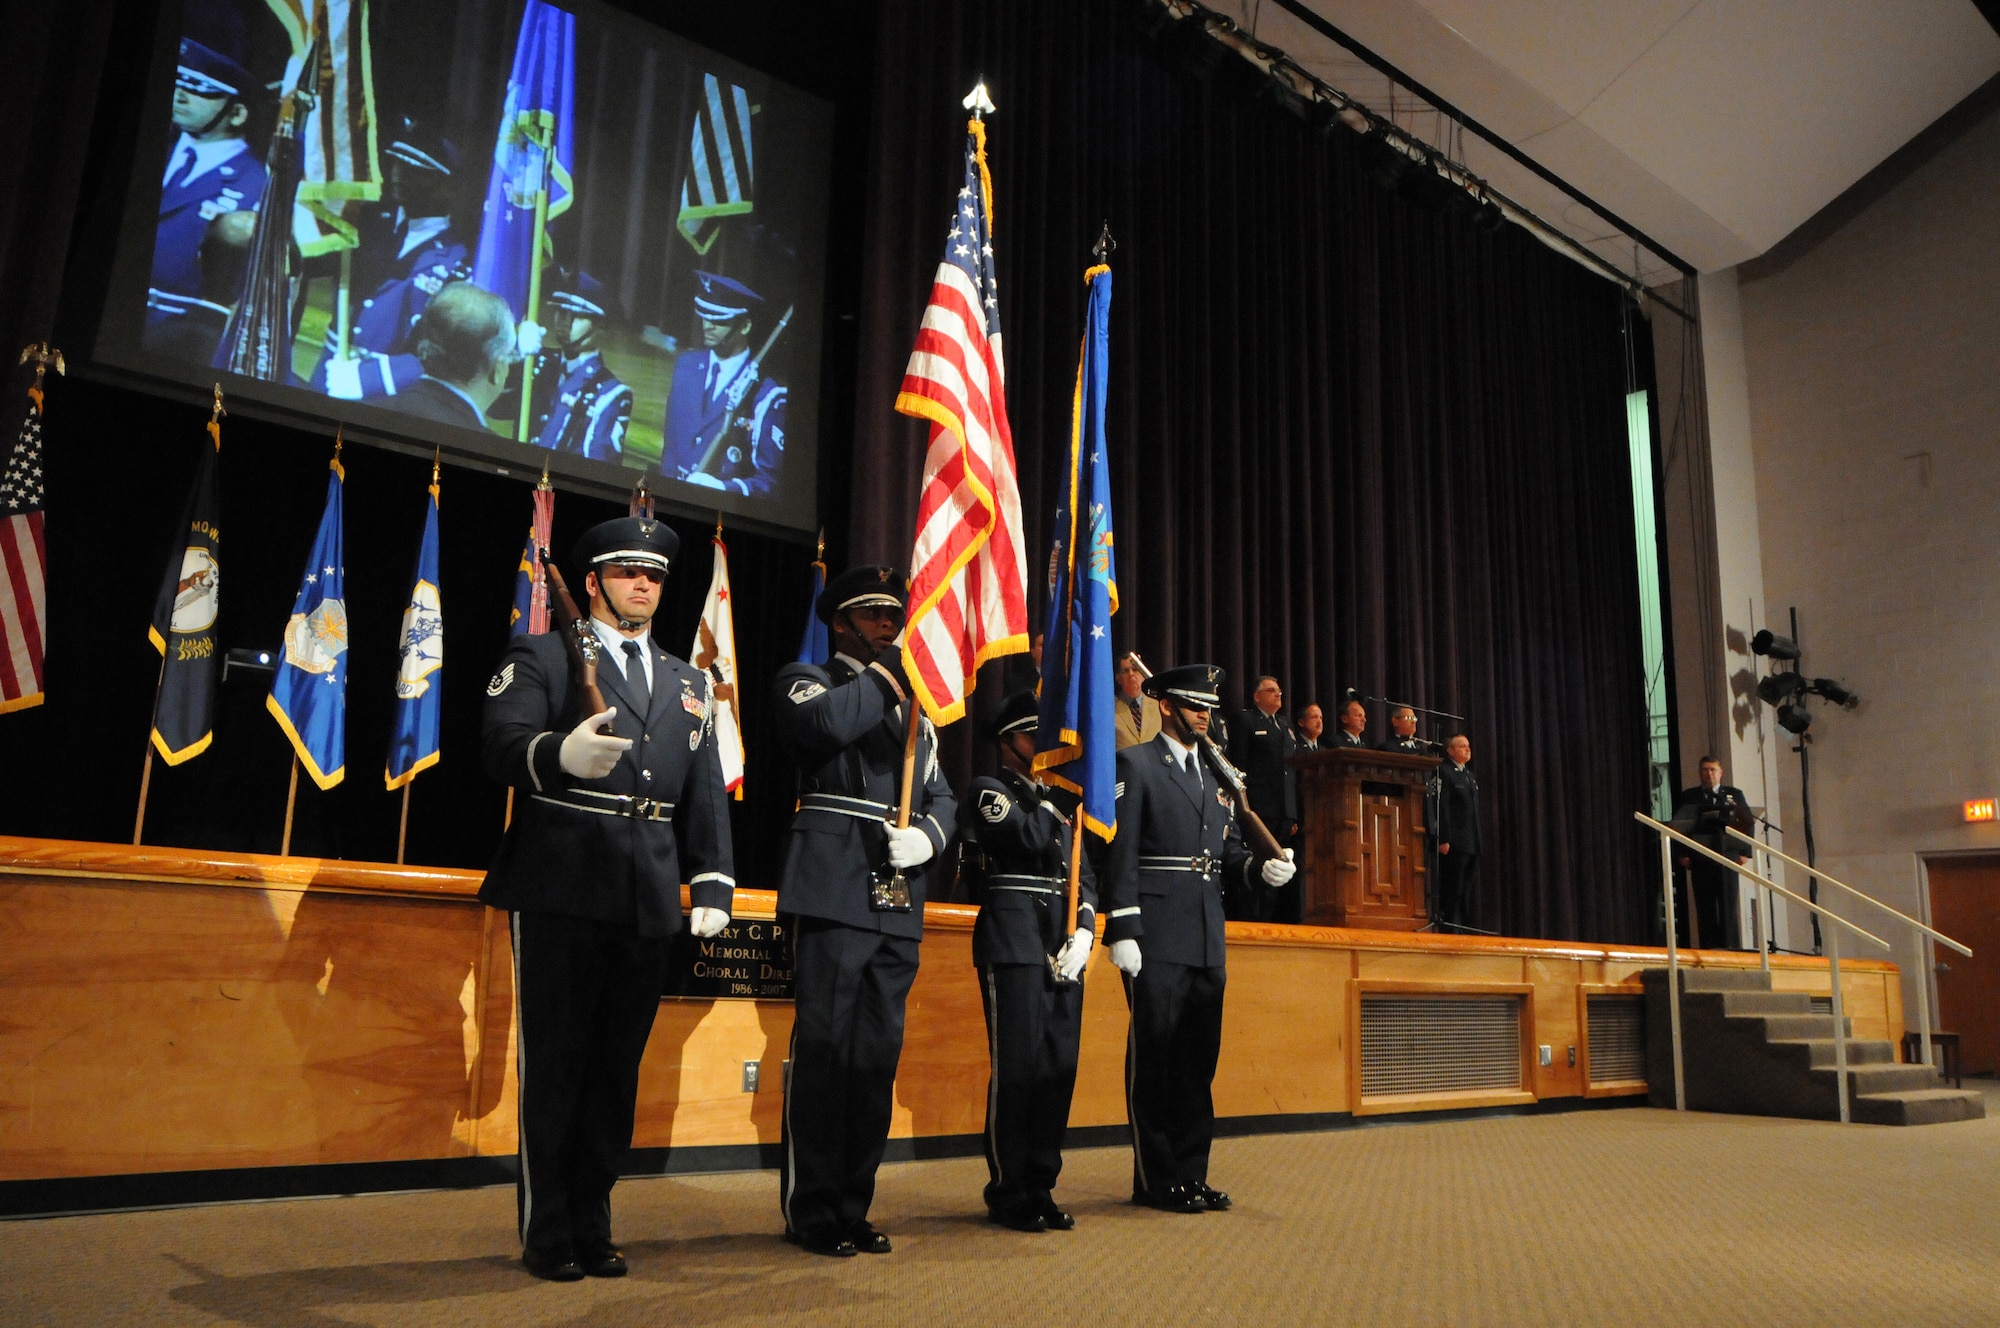 The Base Honor Guard presents the colors April 17, 2010 during a ceremony held at Louisville Male High School in Louisville, Ky., to bestow the 123rd Airlift Wing with its 14th Air Force Outstanding Unit Award. (U.S. Air Force photo/Senior Airman Maxwell Rechel)